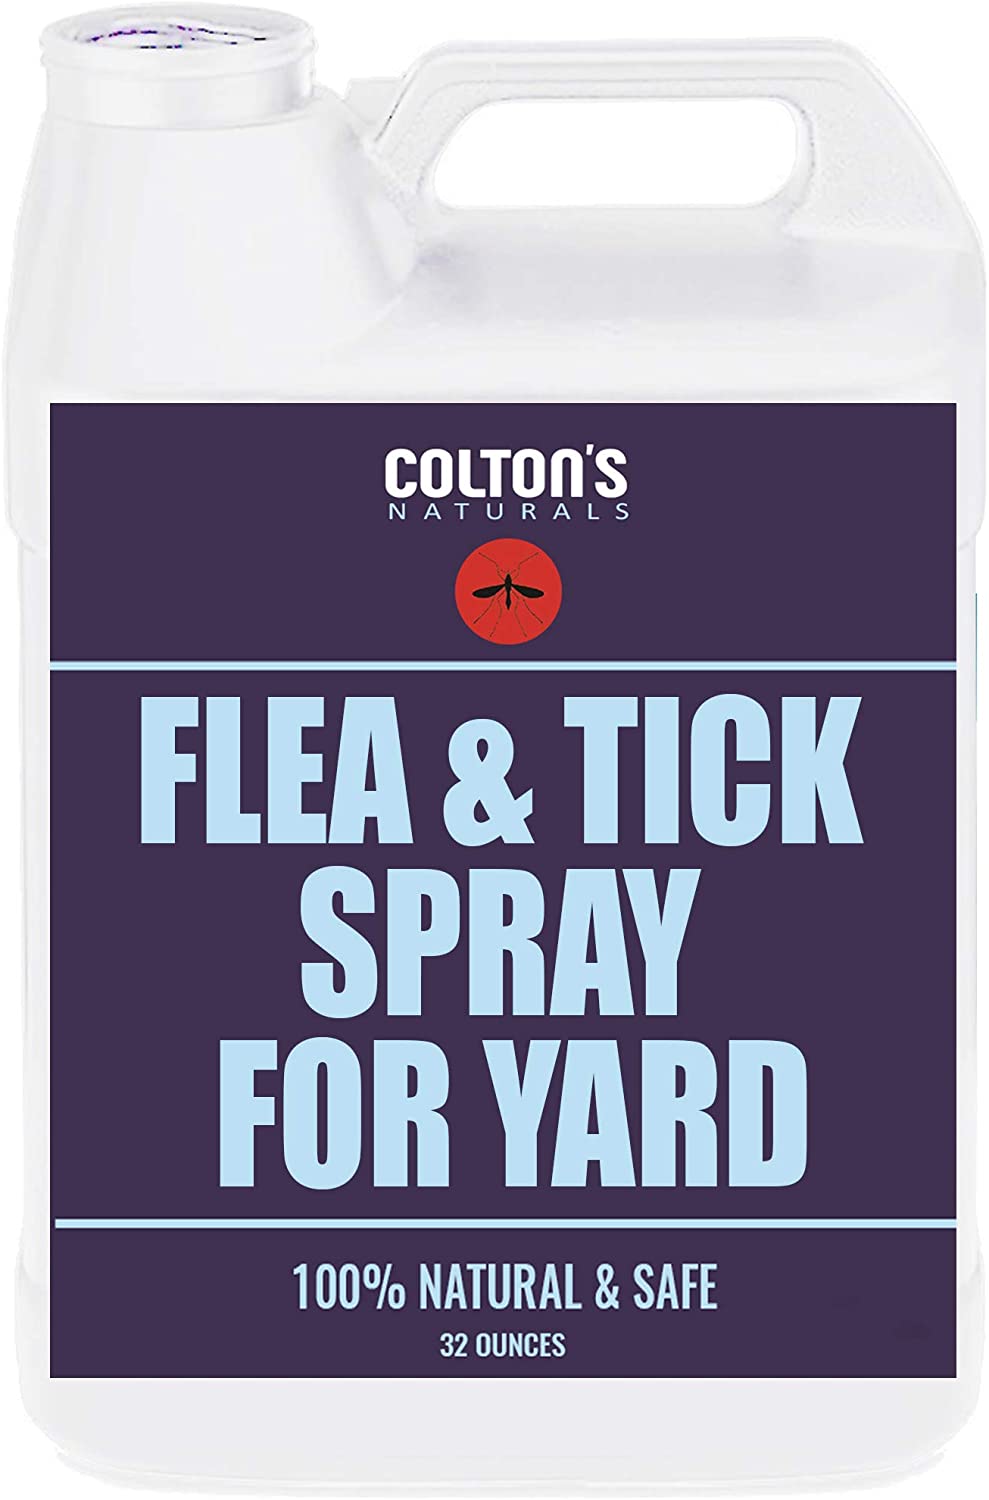 Coltan’s Natural Yard Spray for Ticks and Fleas